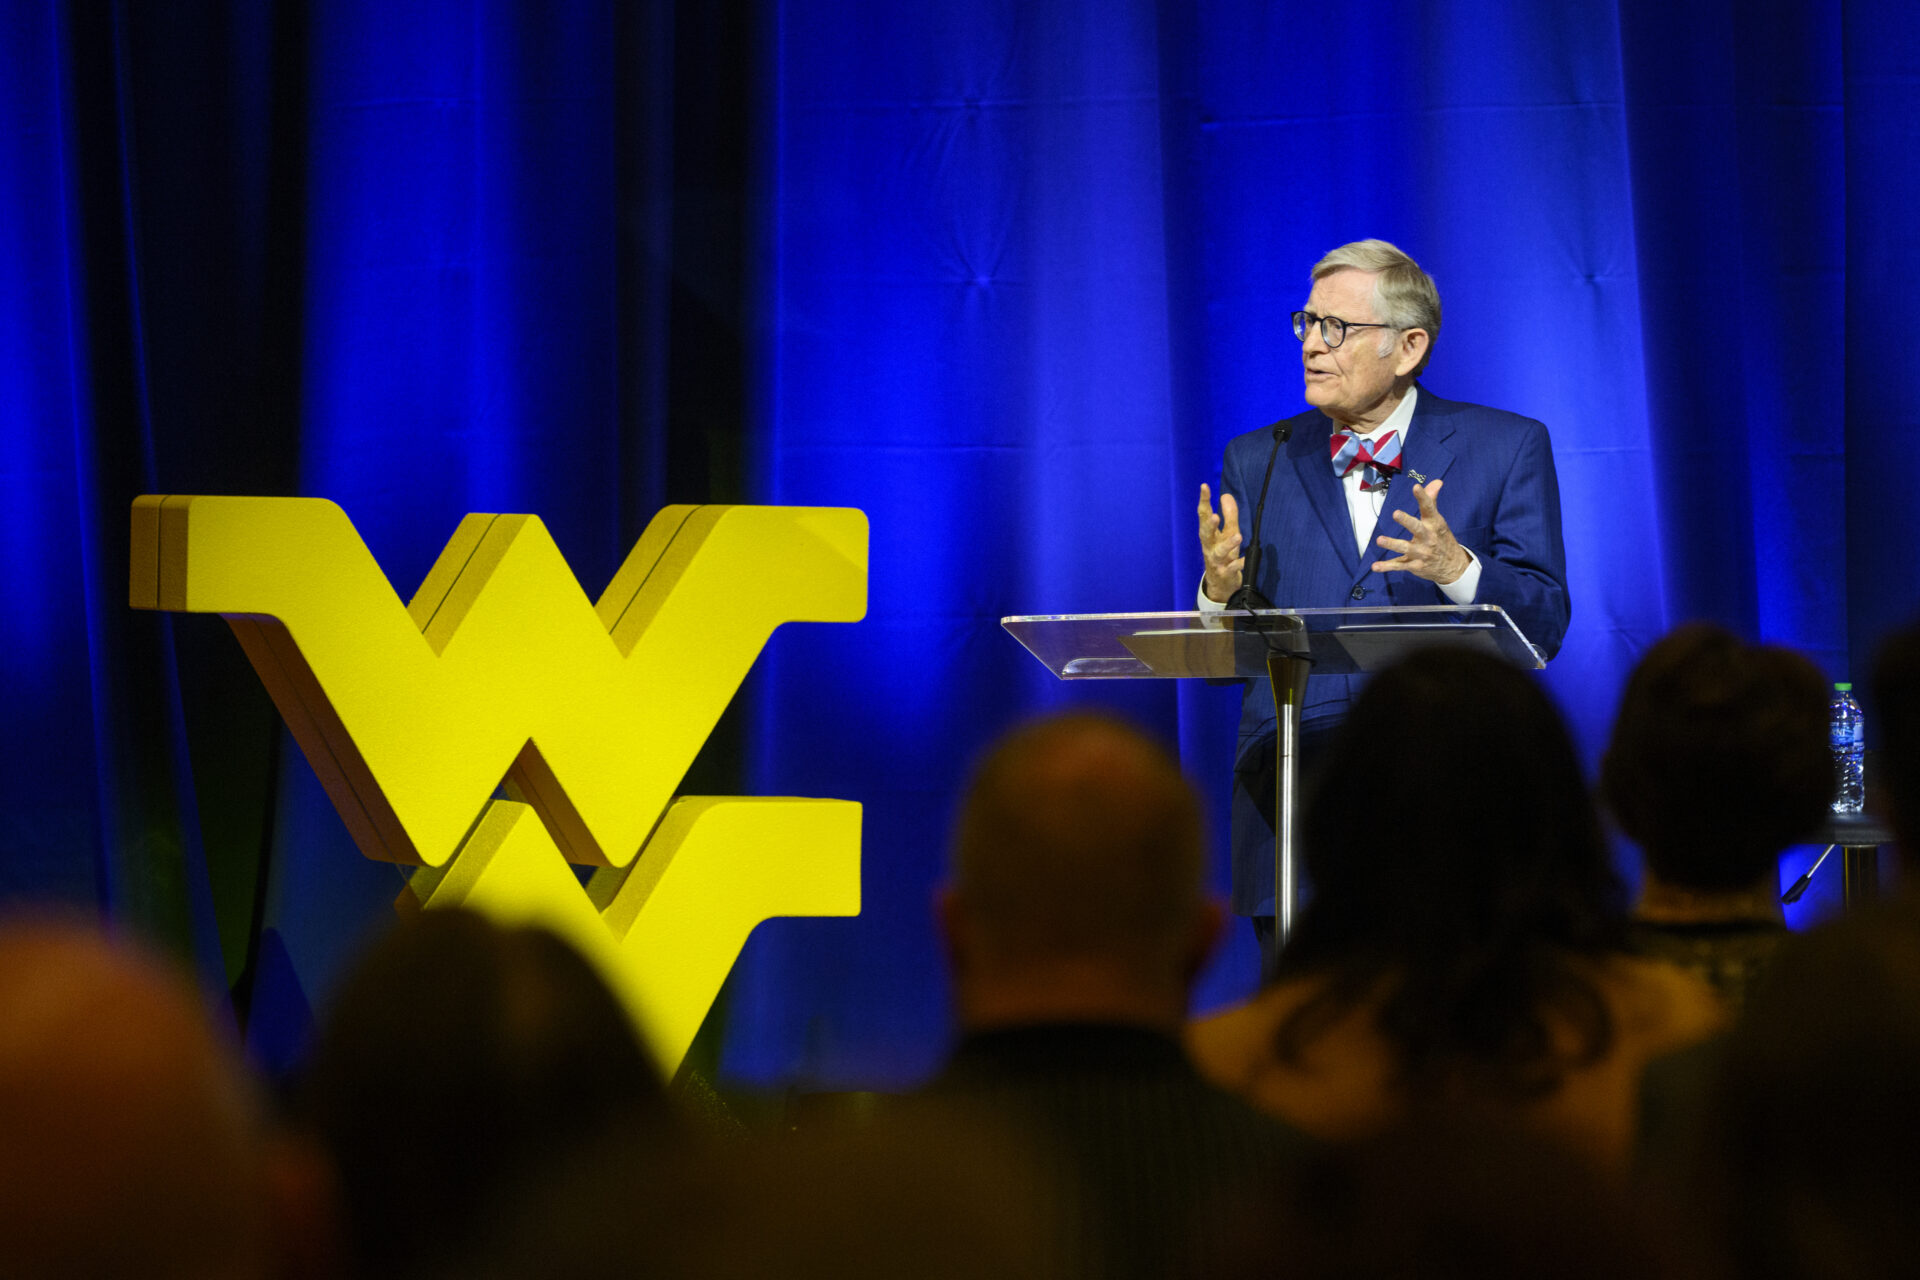 WVU President Gordon Gee Faces University’s Challenges In State Of University Address